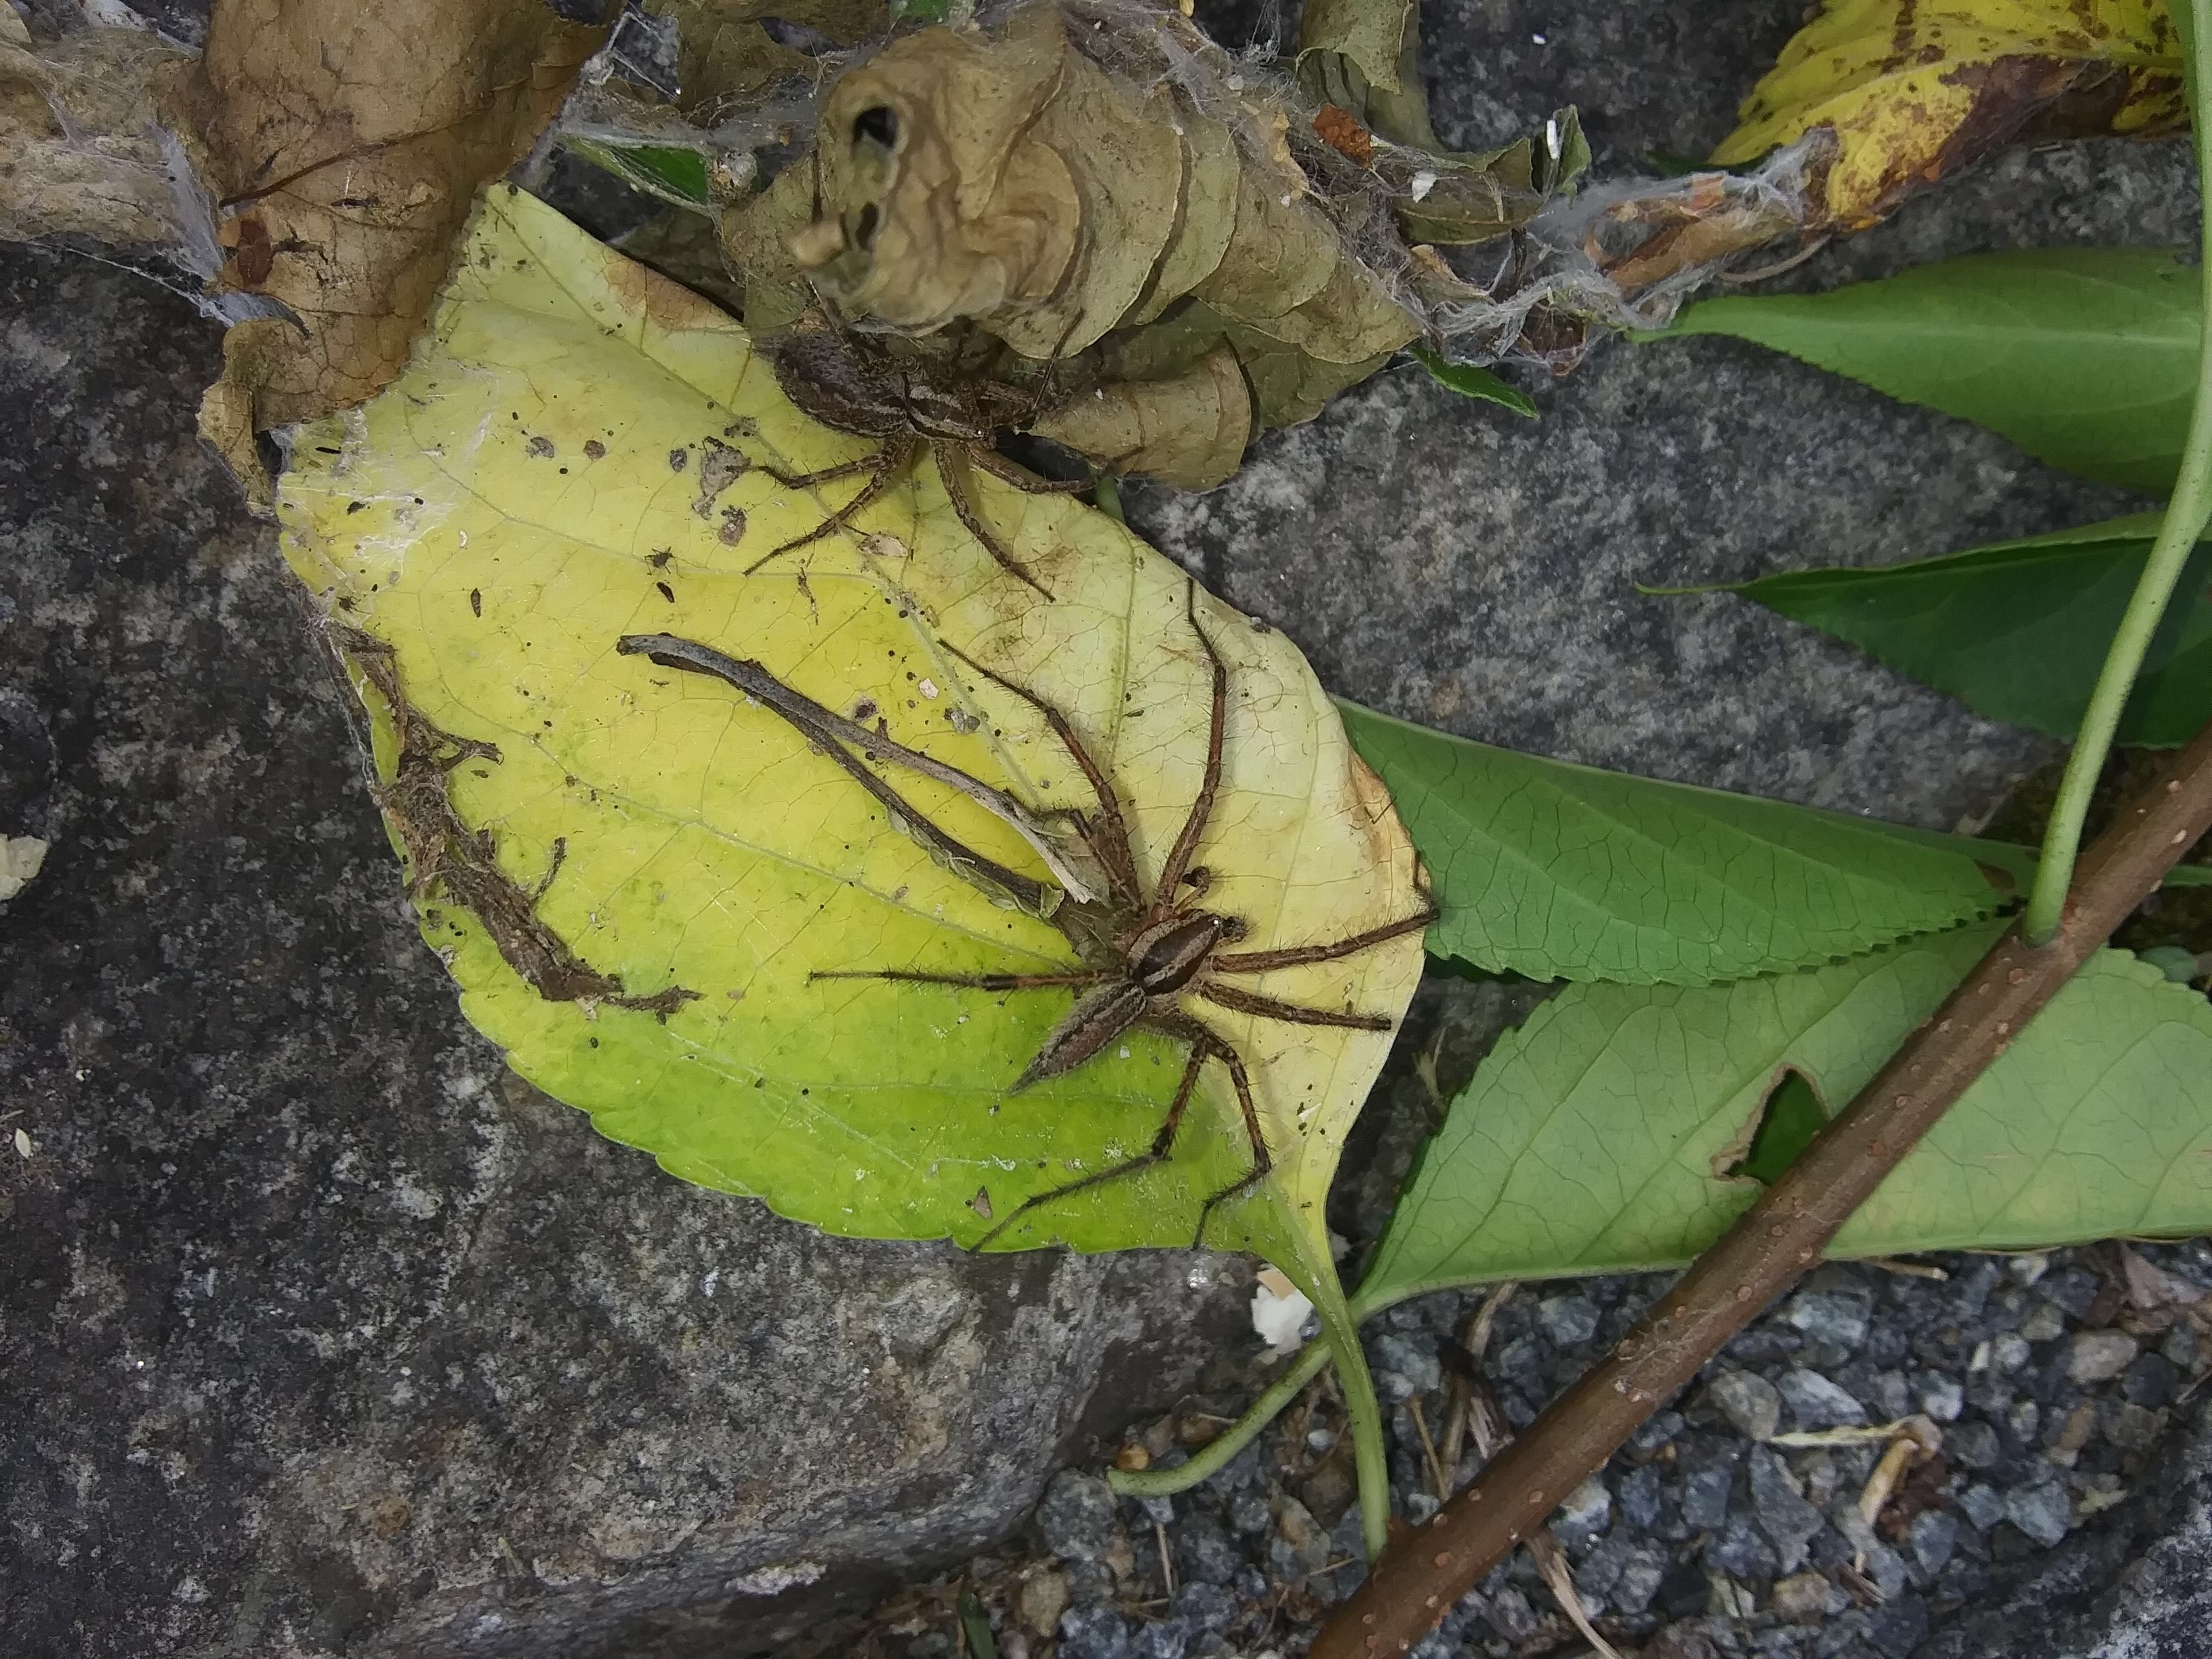 Picture of Agelenopsis (Grass Spiders) - Male,Female - Dorsal